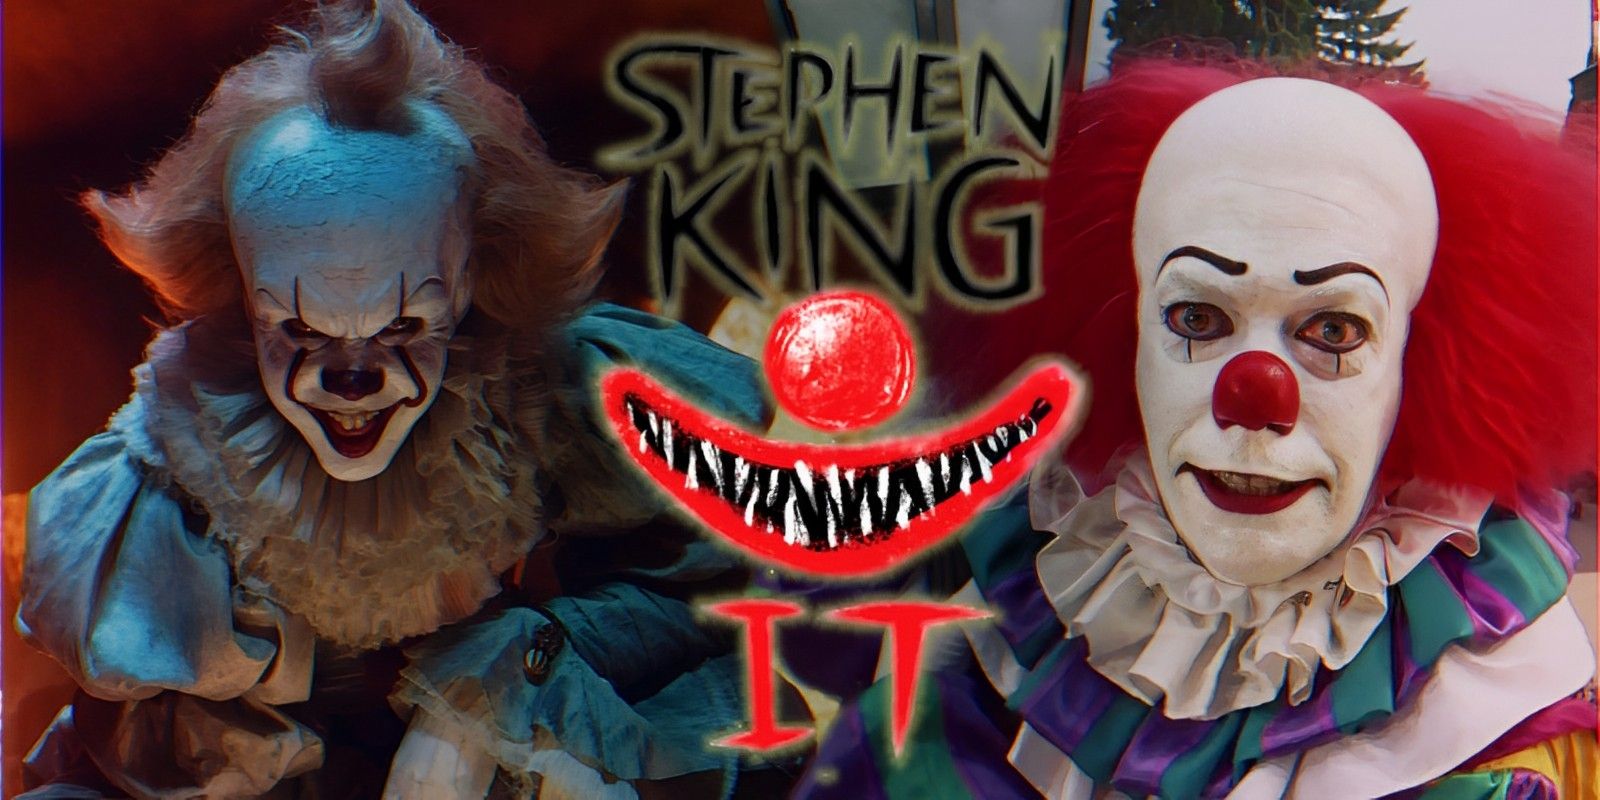 Stephen King’s IT novel cover between Bill Skarsgård’s Pennywise and Tim Curry’s Pennywise.